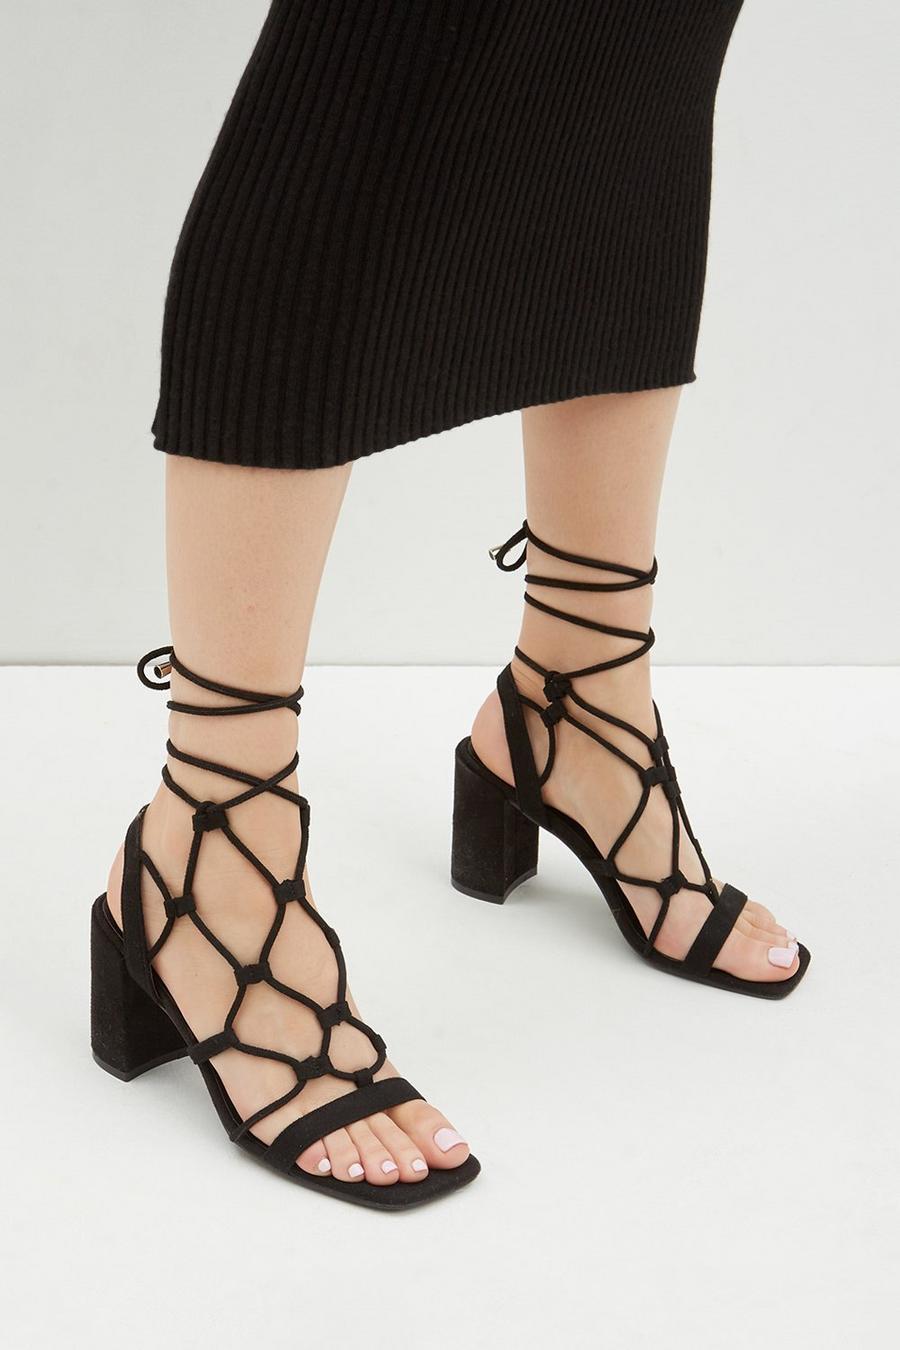 Swoon Woven Lace Up Sandals